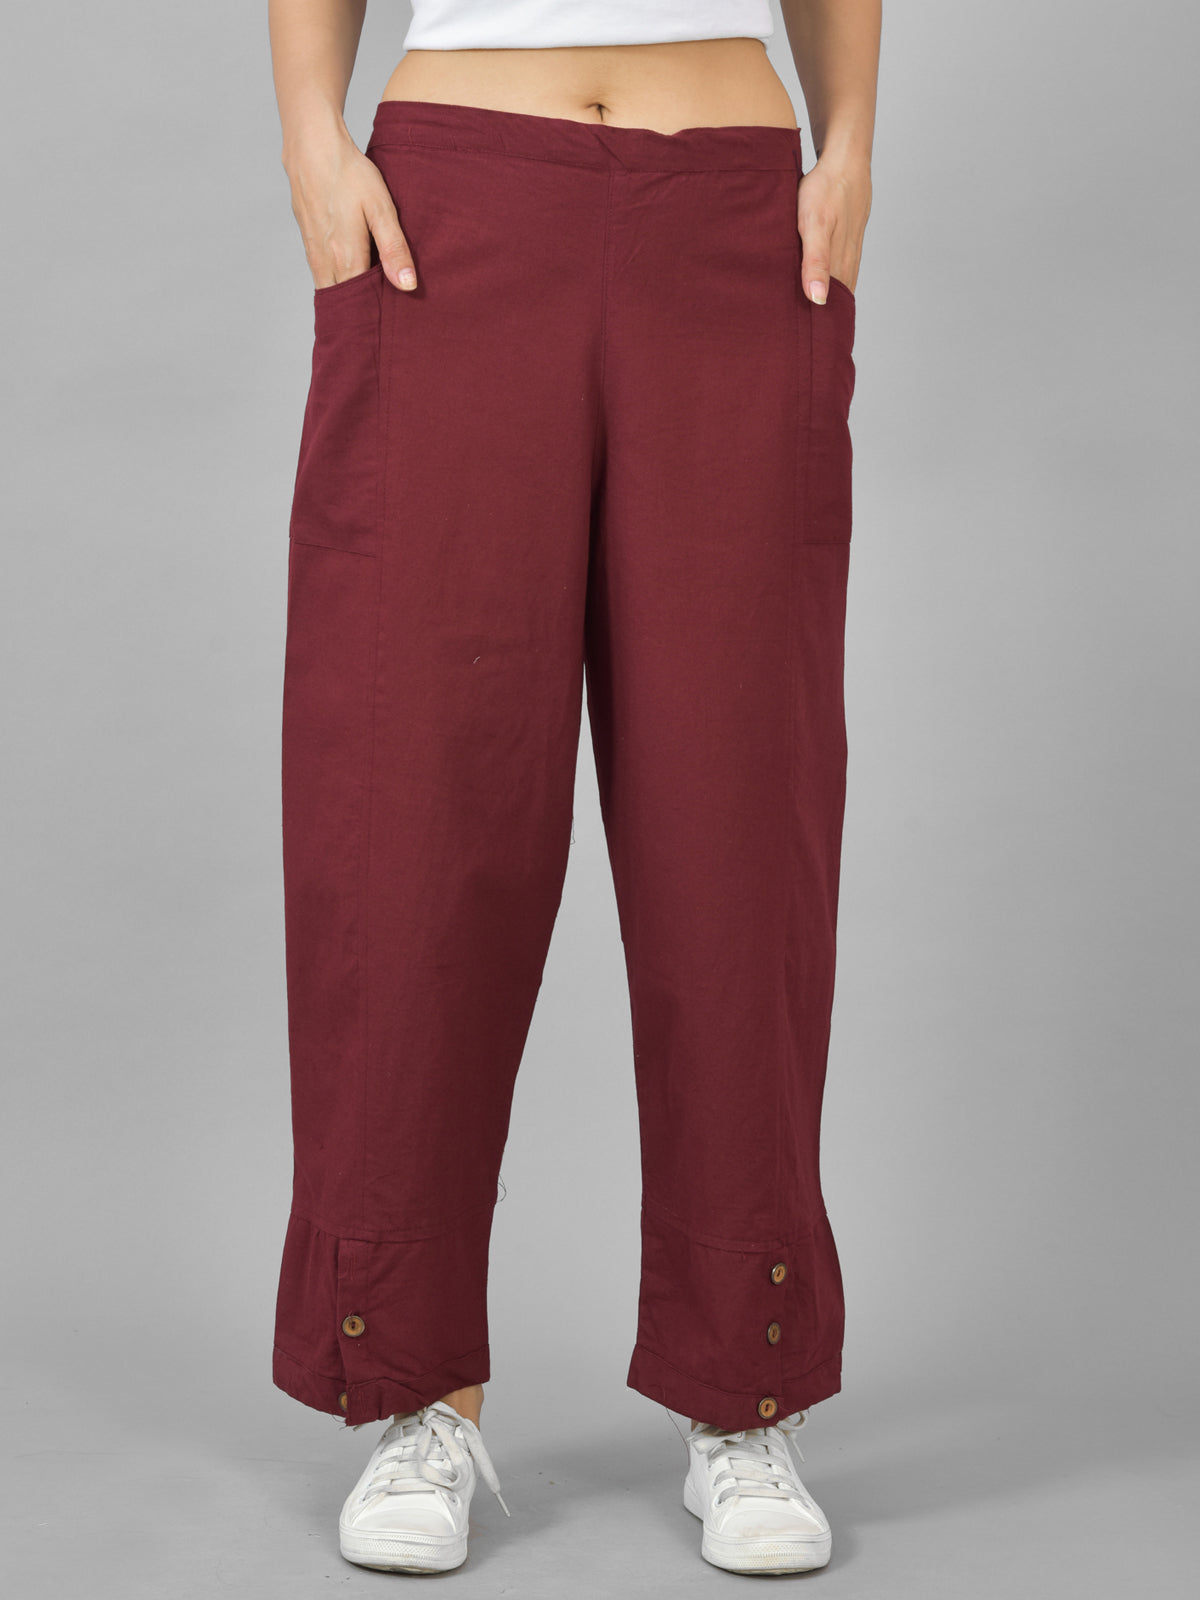 Combo Pack Of Womens Teal Blue And Wine Side Pocket Straight Cargo Pants